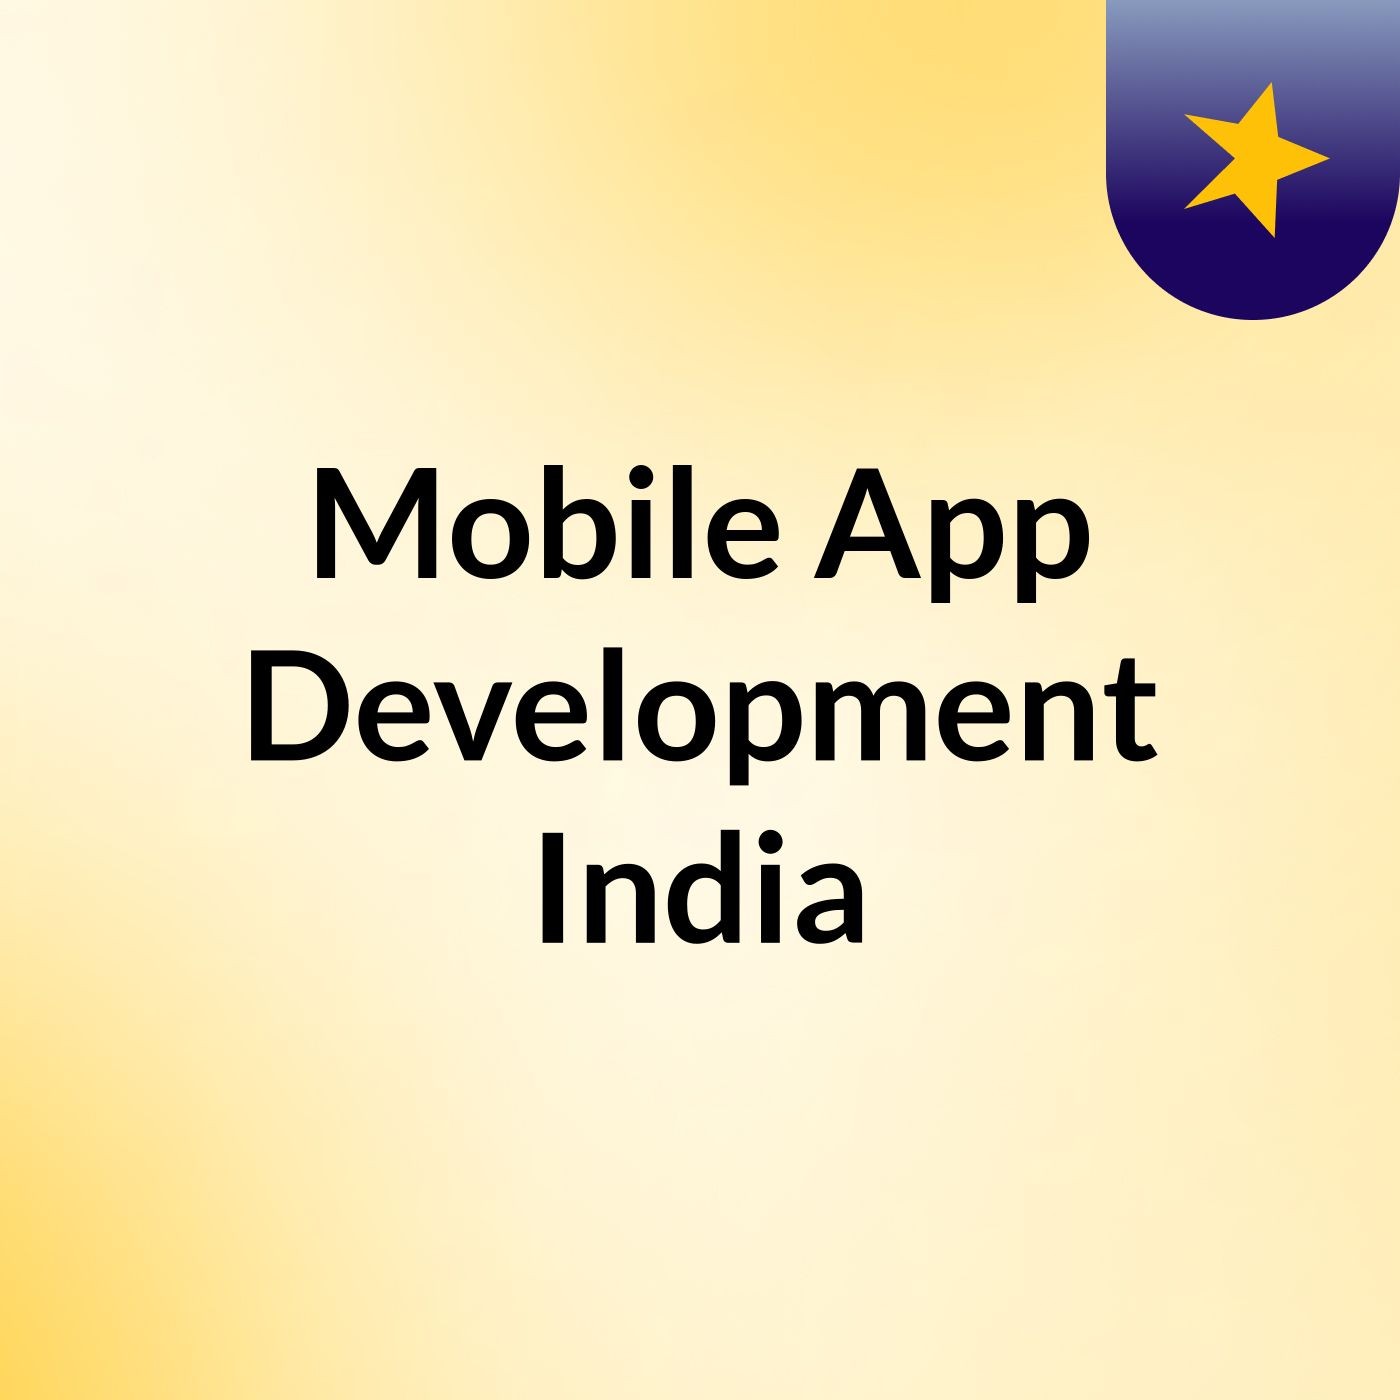 APPLICATION DEVELOPMENT COST IN INDIA